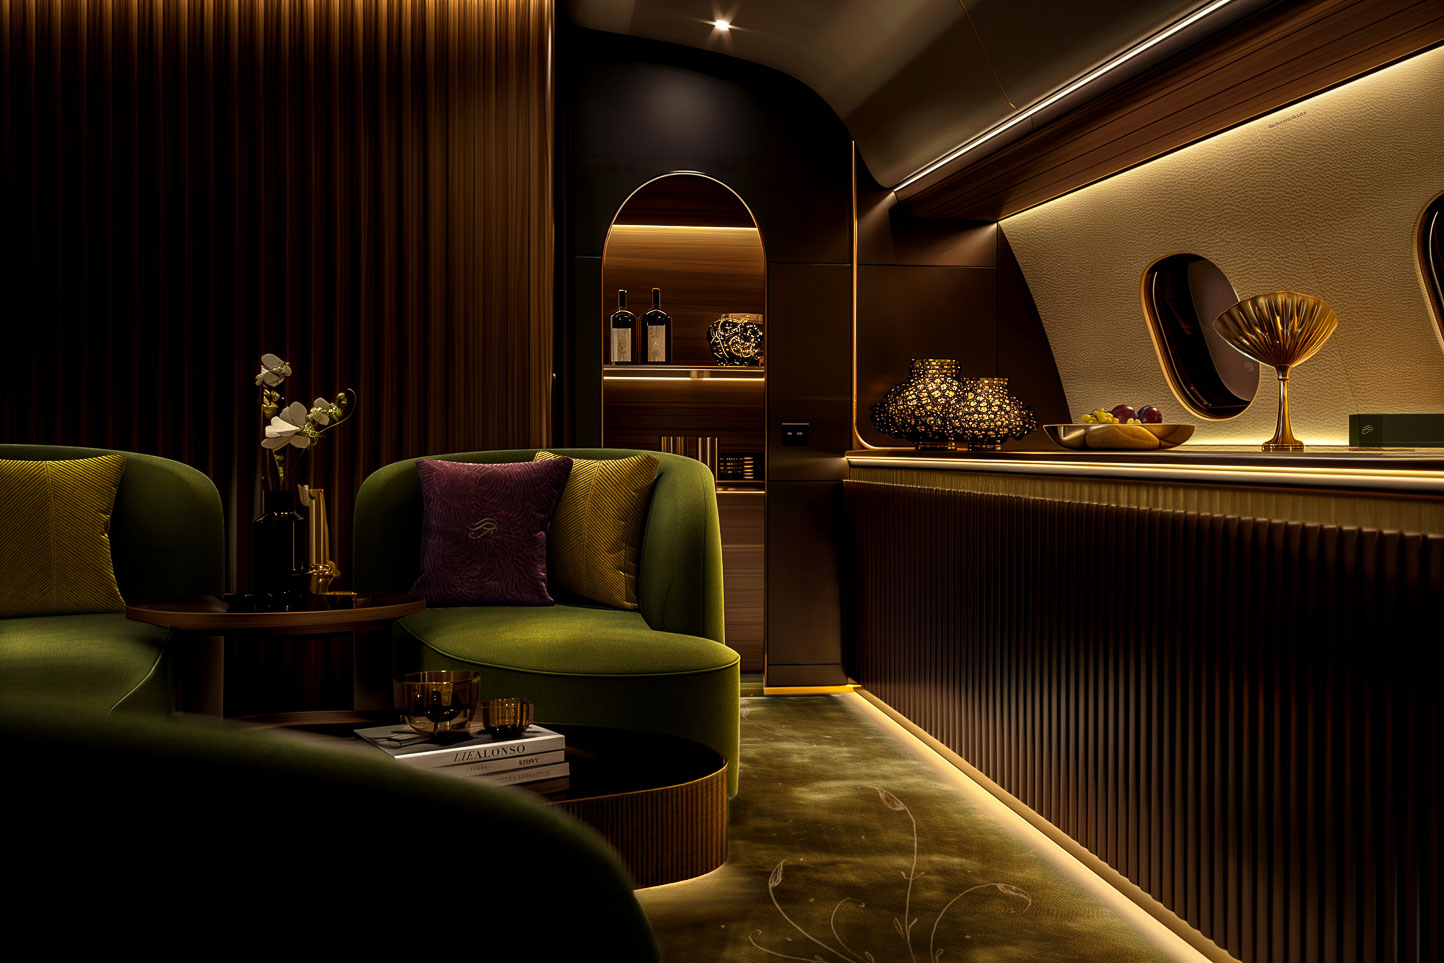 Lie Alonso Dynasty - Private Jet Luxury Interior Design - Exoticism and the Ancient Future